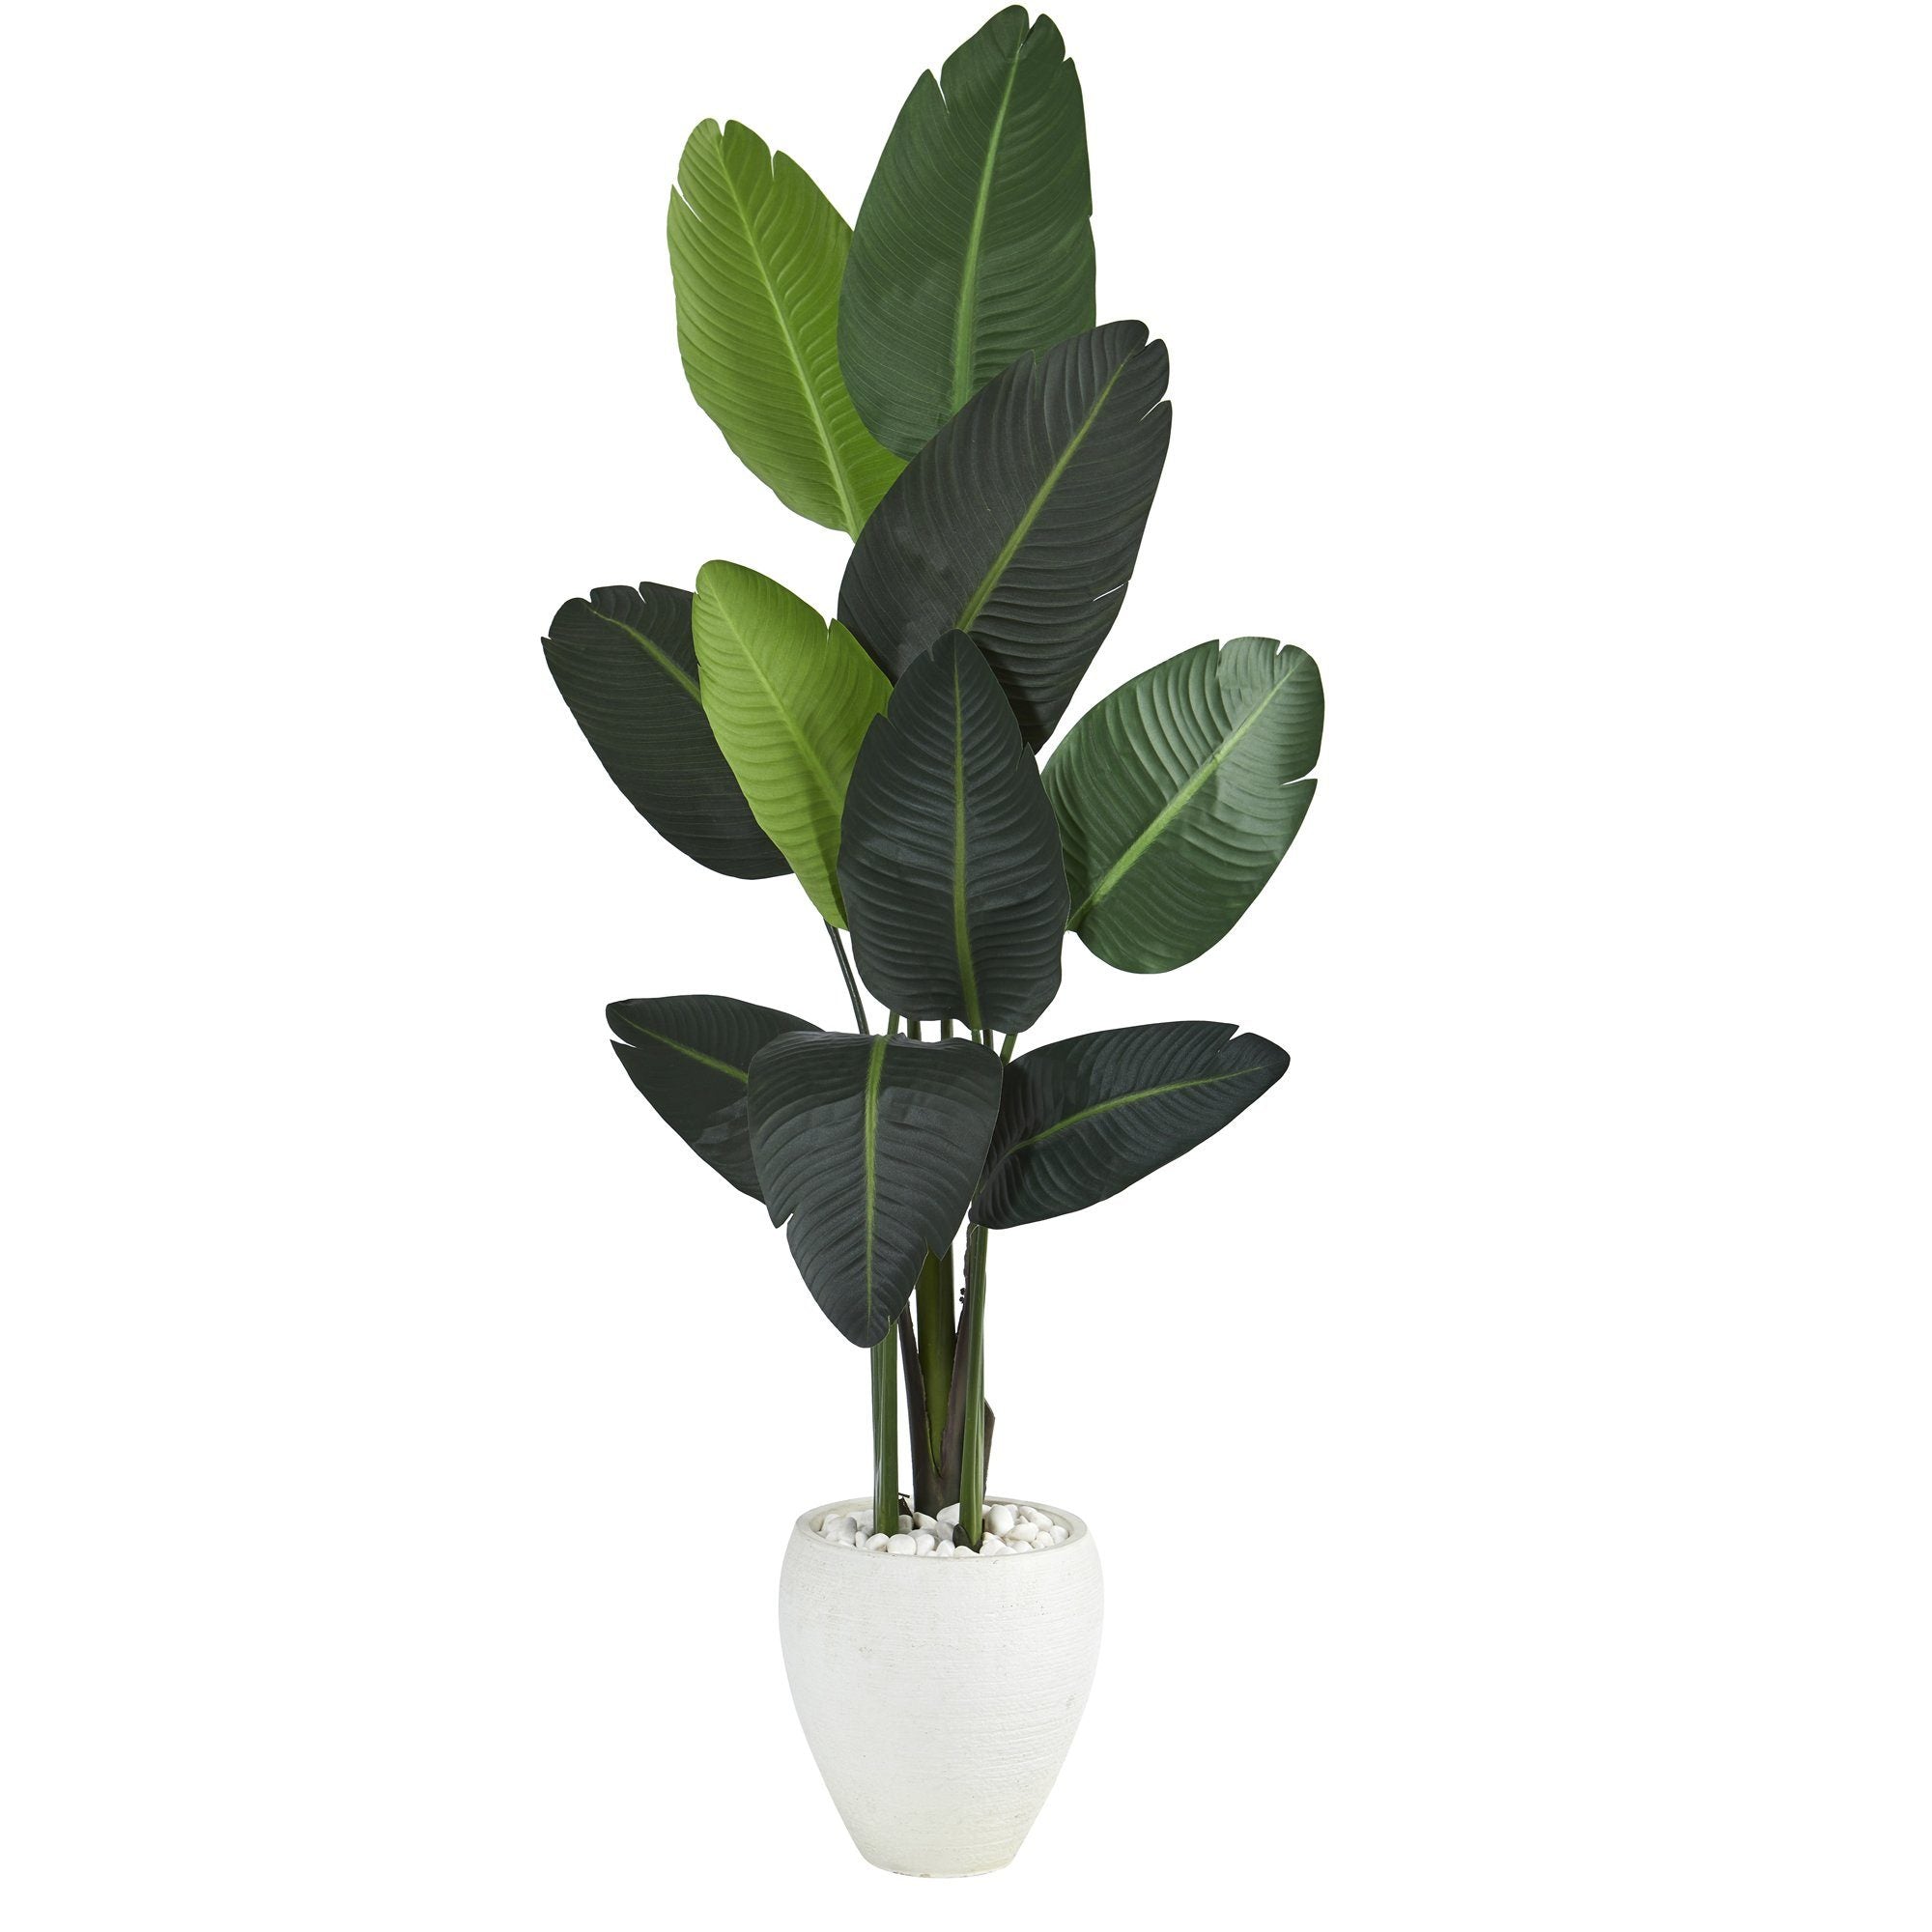 Image of 63” Traveler's Palm Artificial tree in White Planter